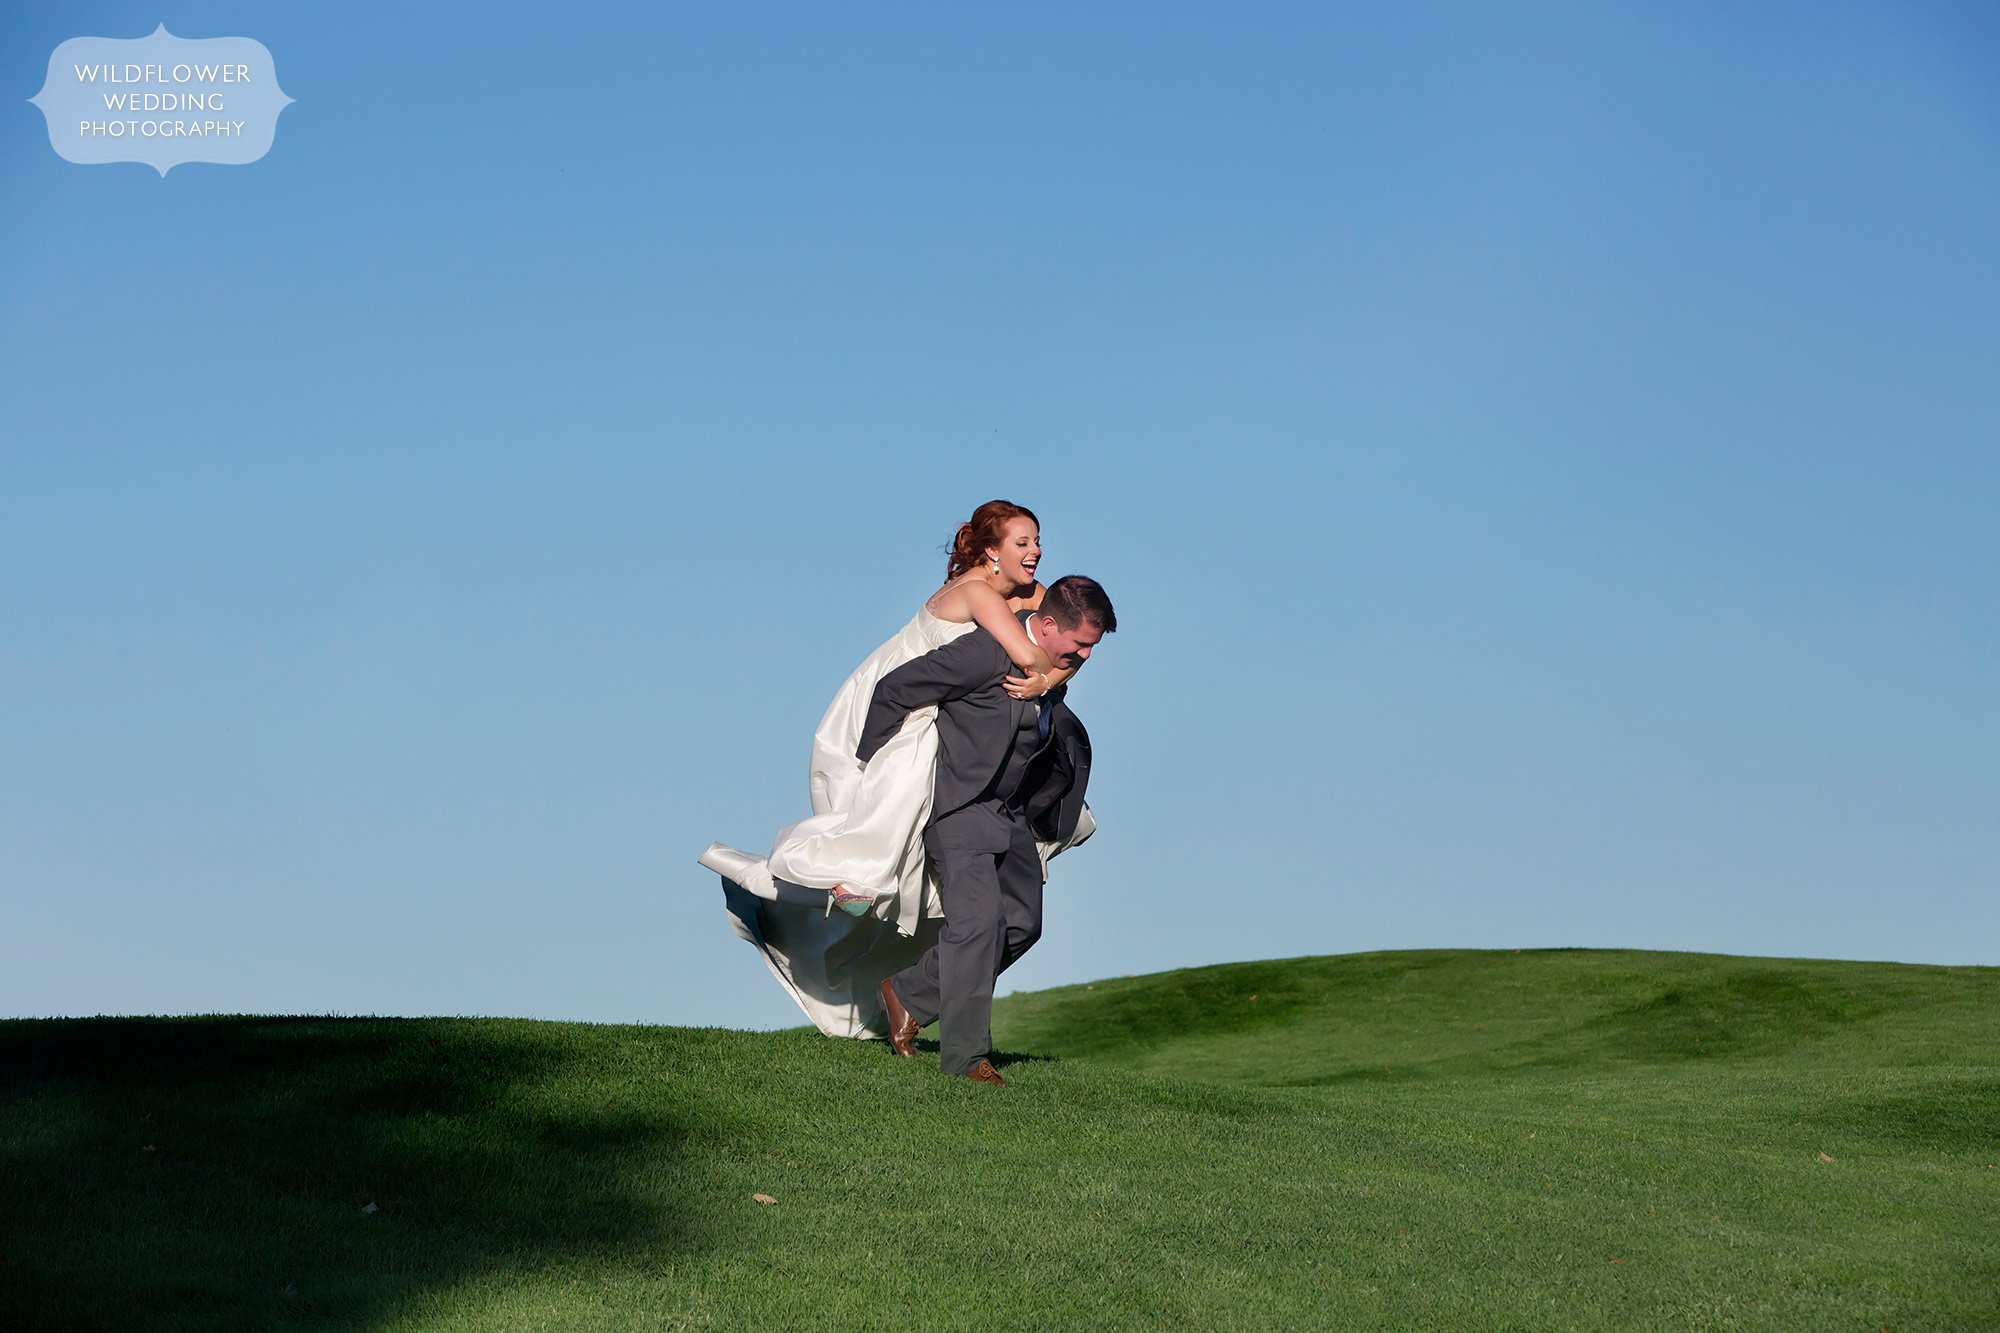 The groom gives the bride a piggyback ride at the Jeff City Country Club.